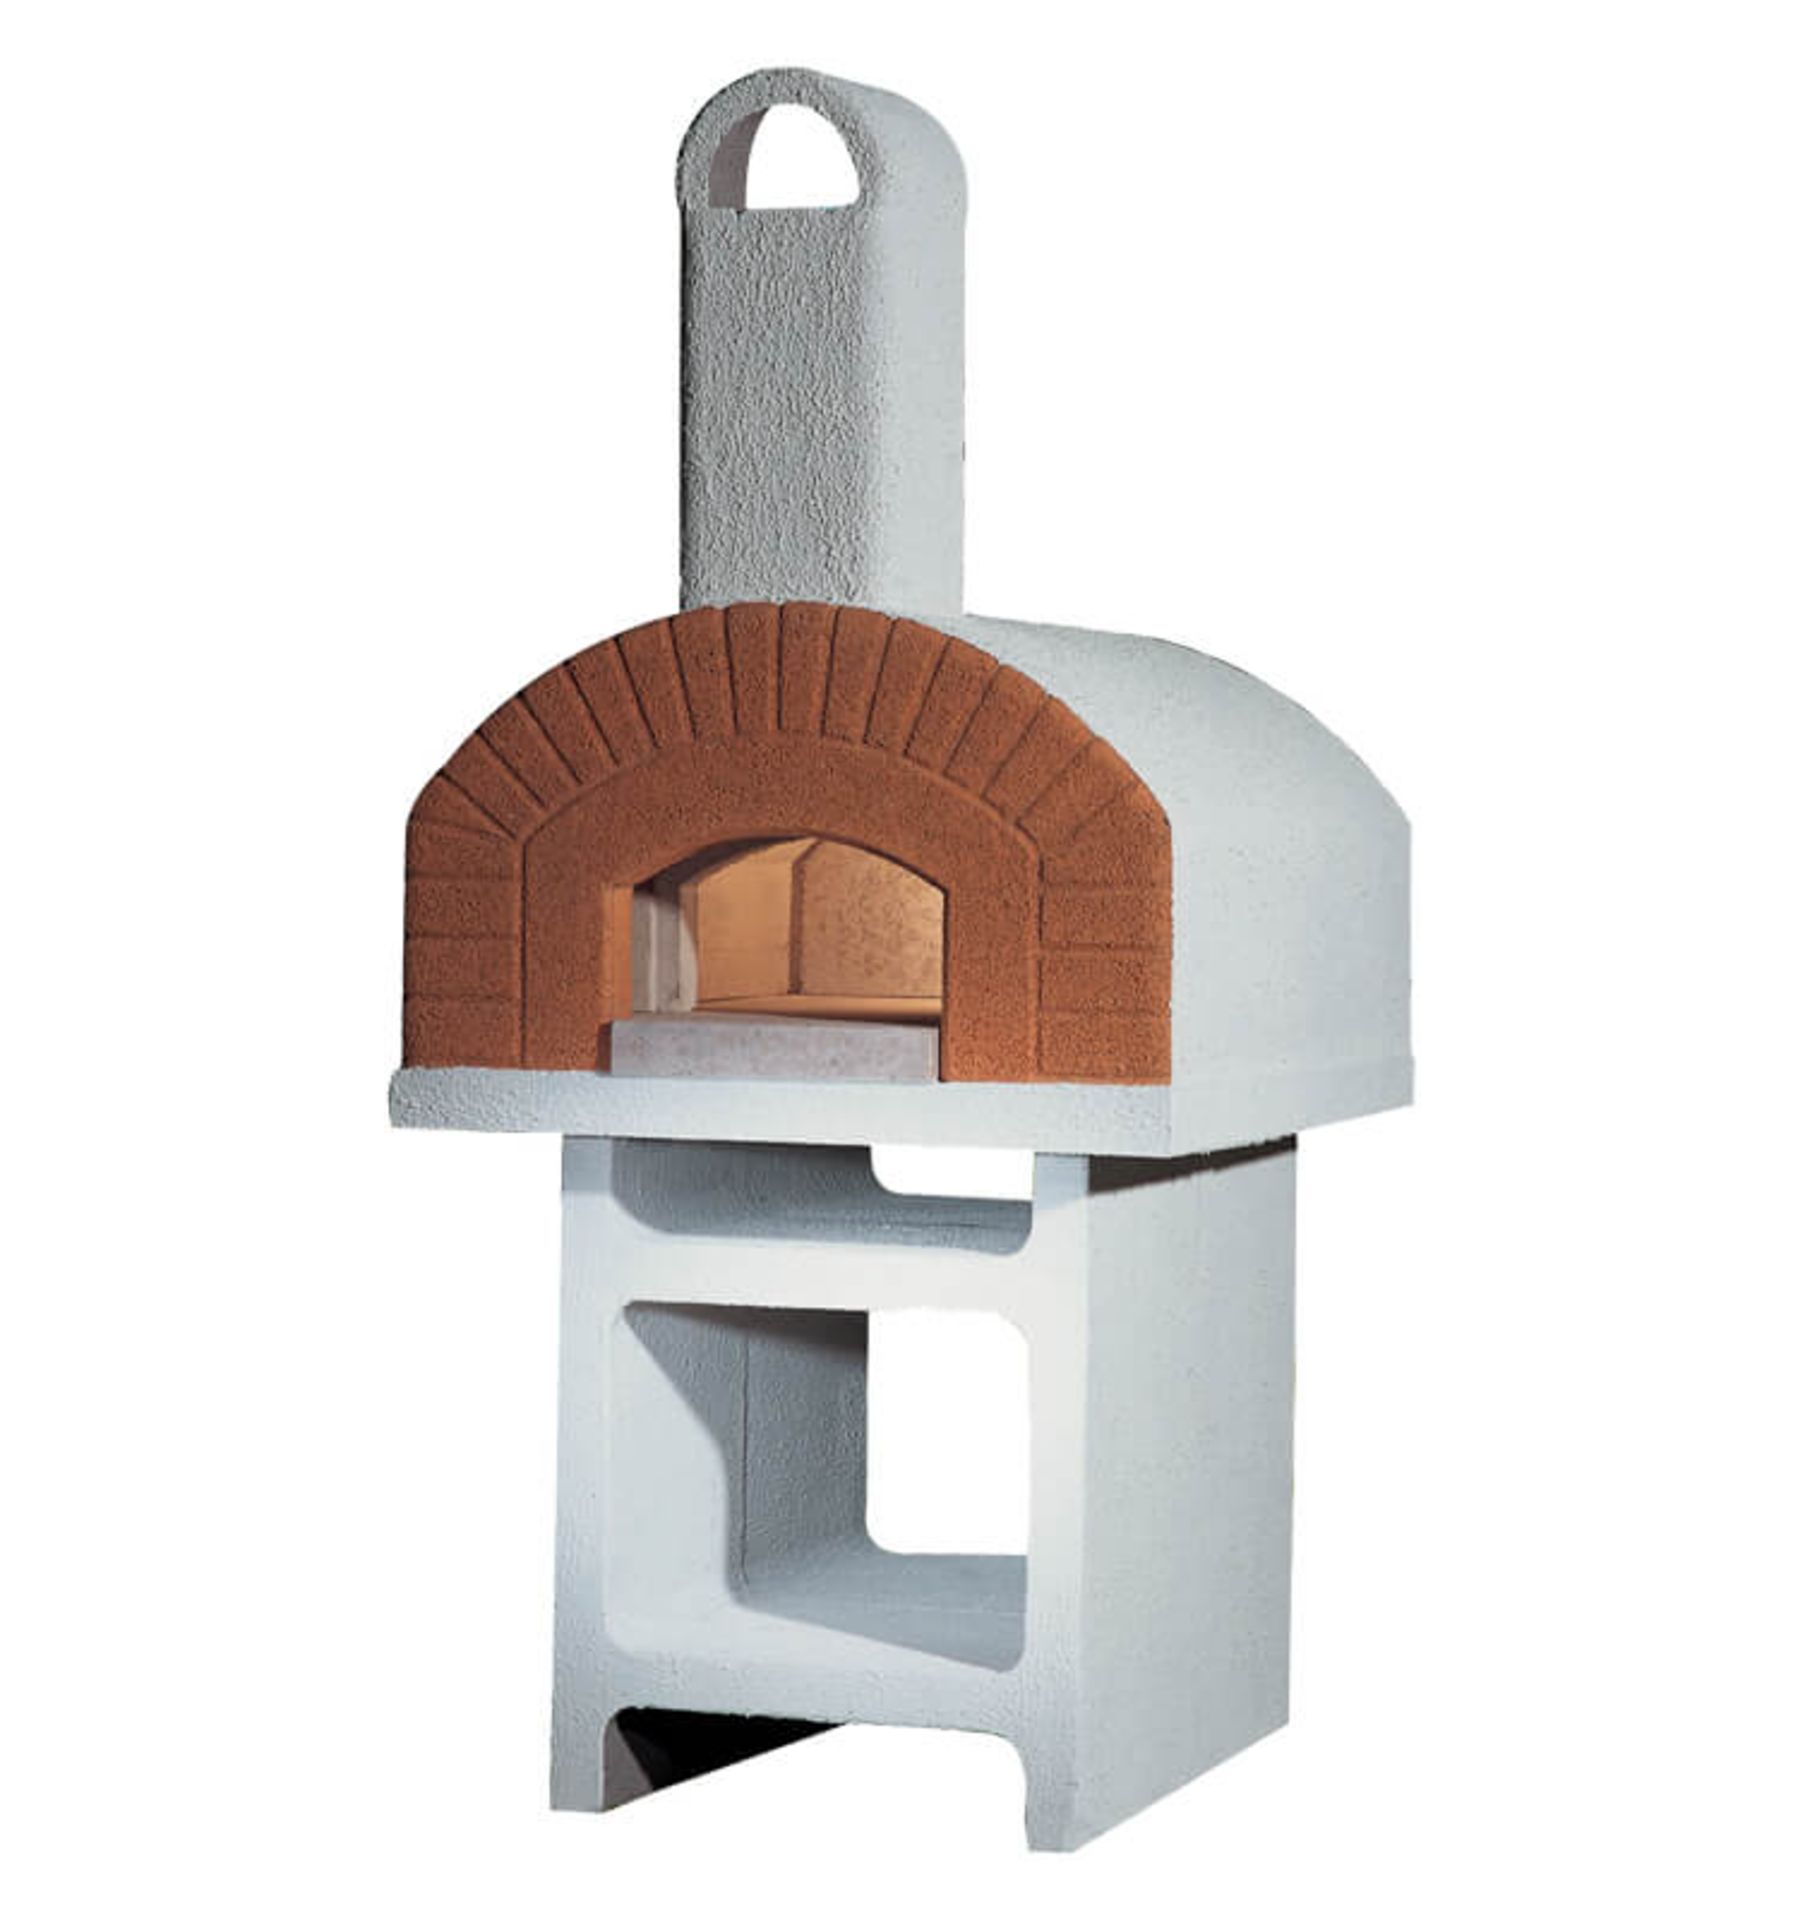 Portici Wood Burning Oven, Weight 980 kg, Oven dimensions L 107, P 118, H 228 cm, Cooking